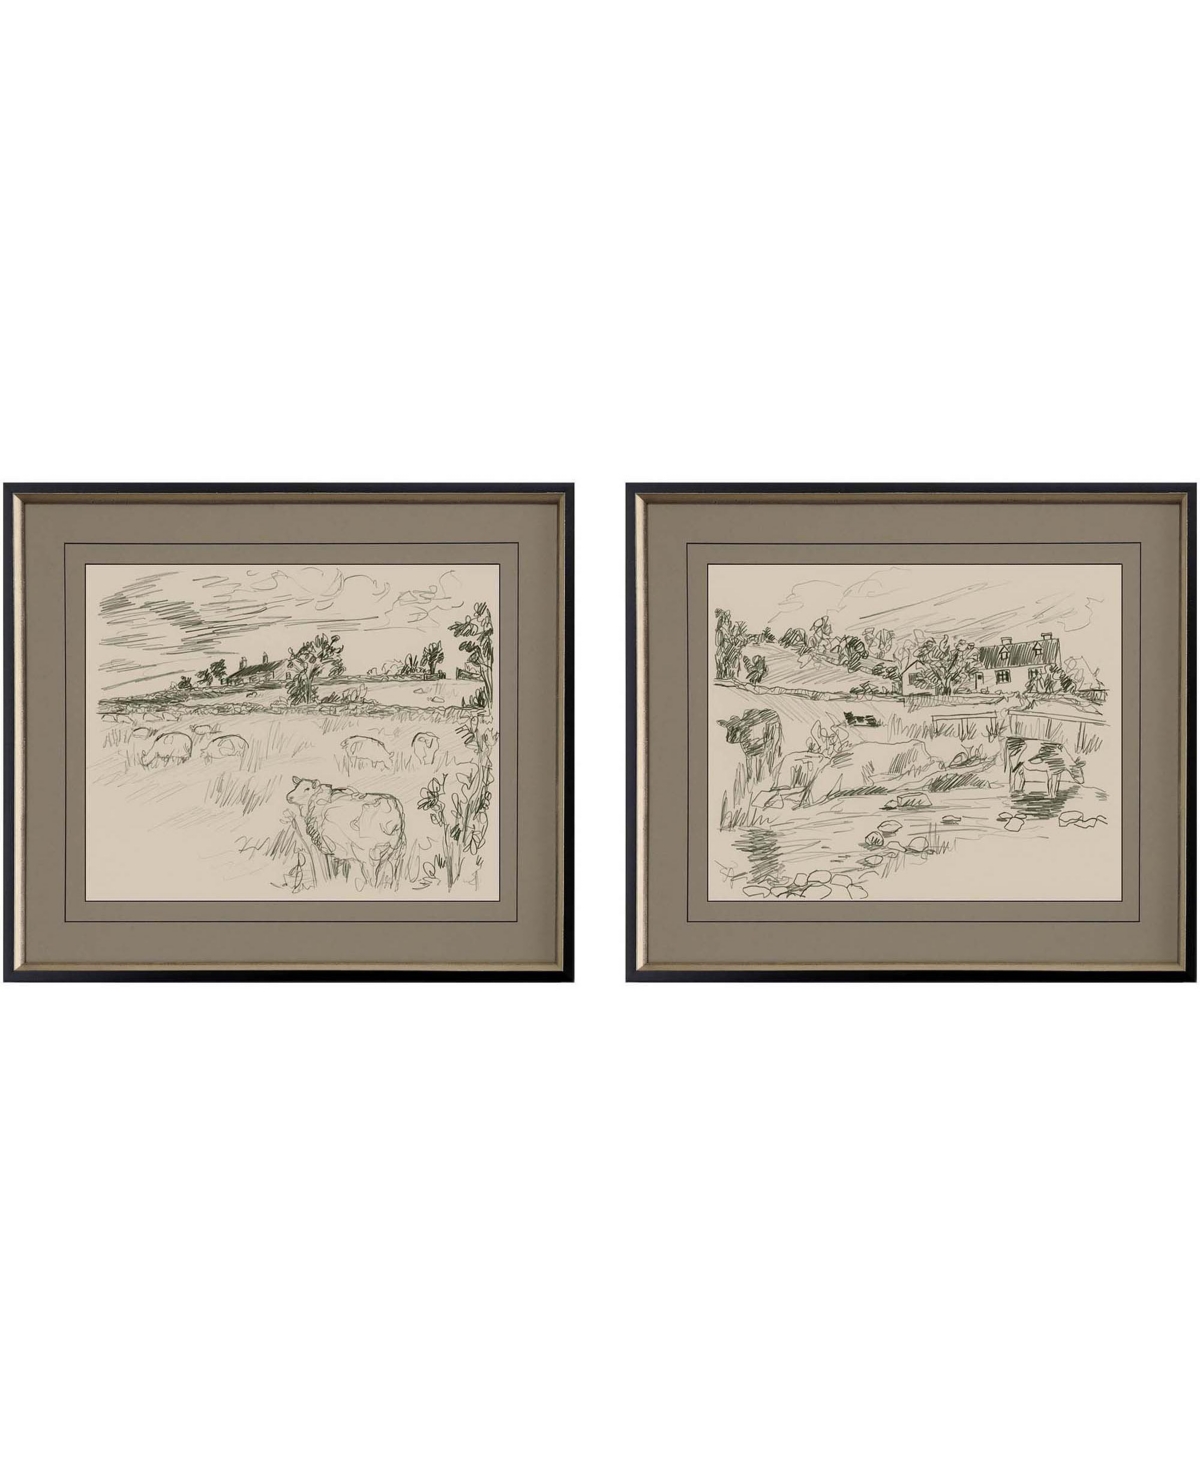 Paragon Picture Gallery Sepia Scenes I Framed Art, Set Of 2